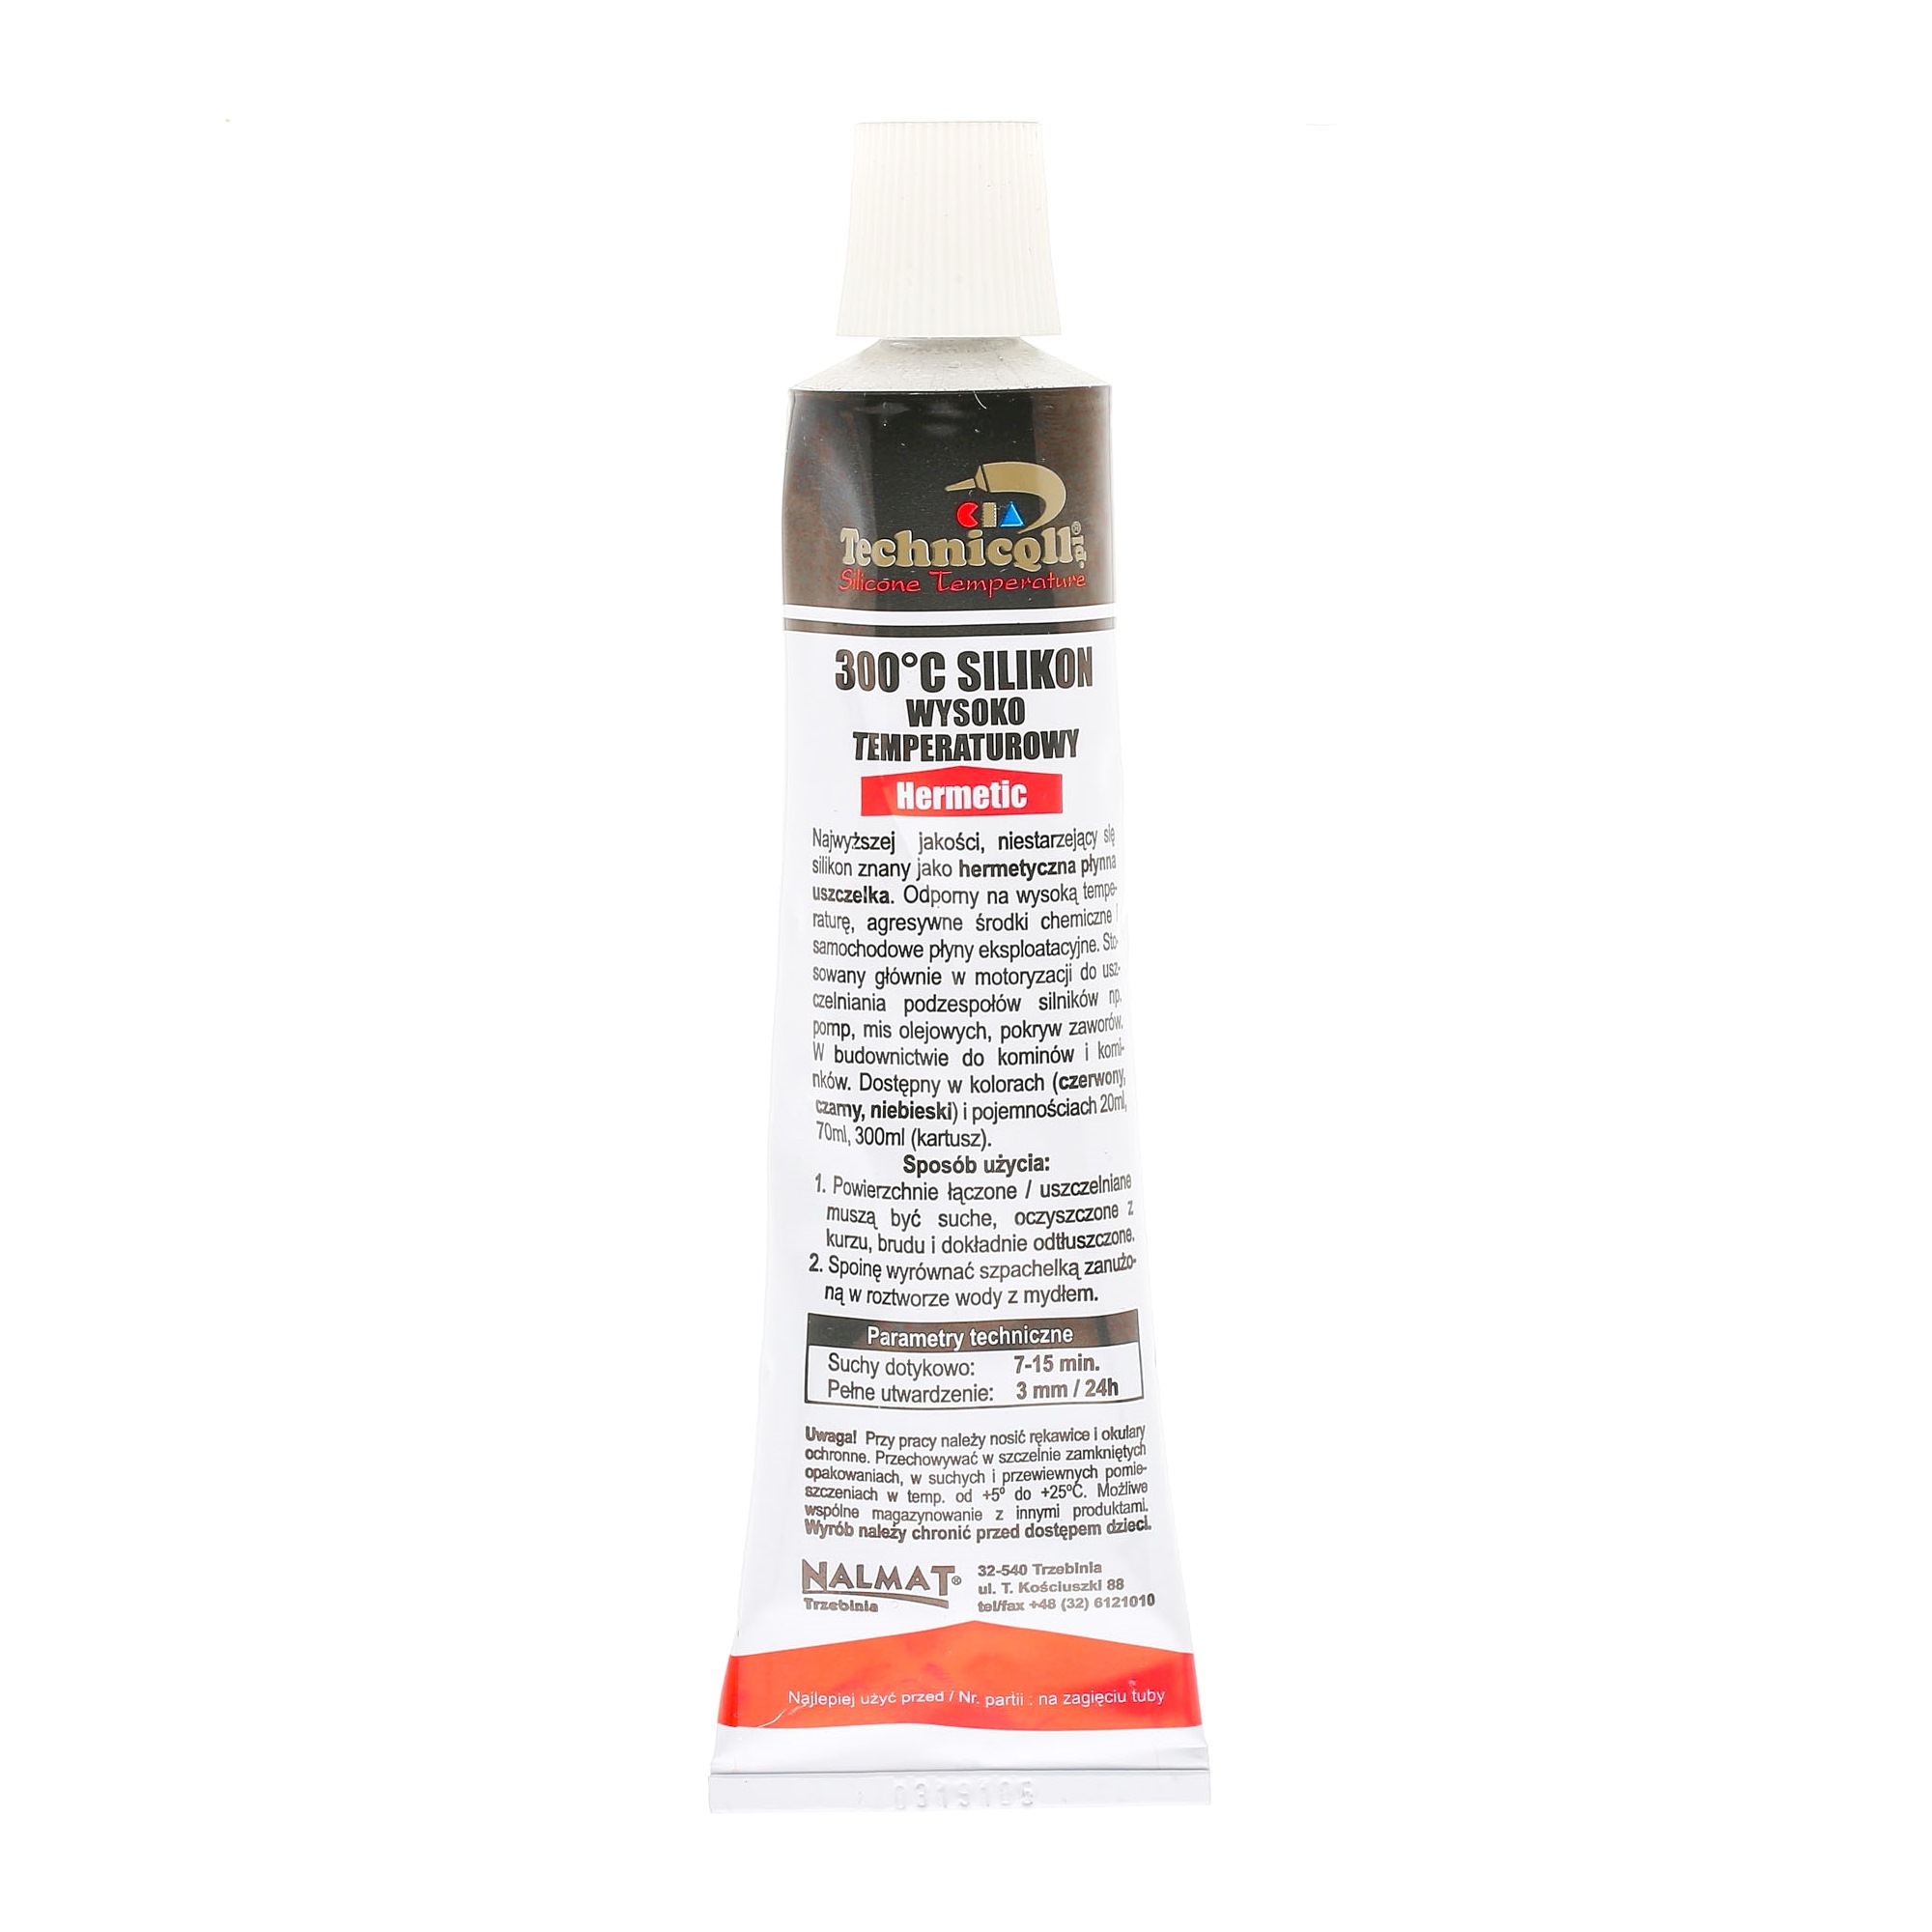 TECHNICQLL S280 All-purpose sealants Capacity: 70ml, Contains silicate, Heat-resistant, red